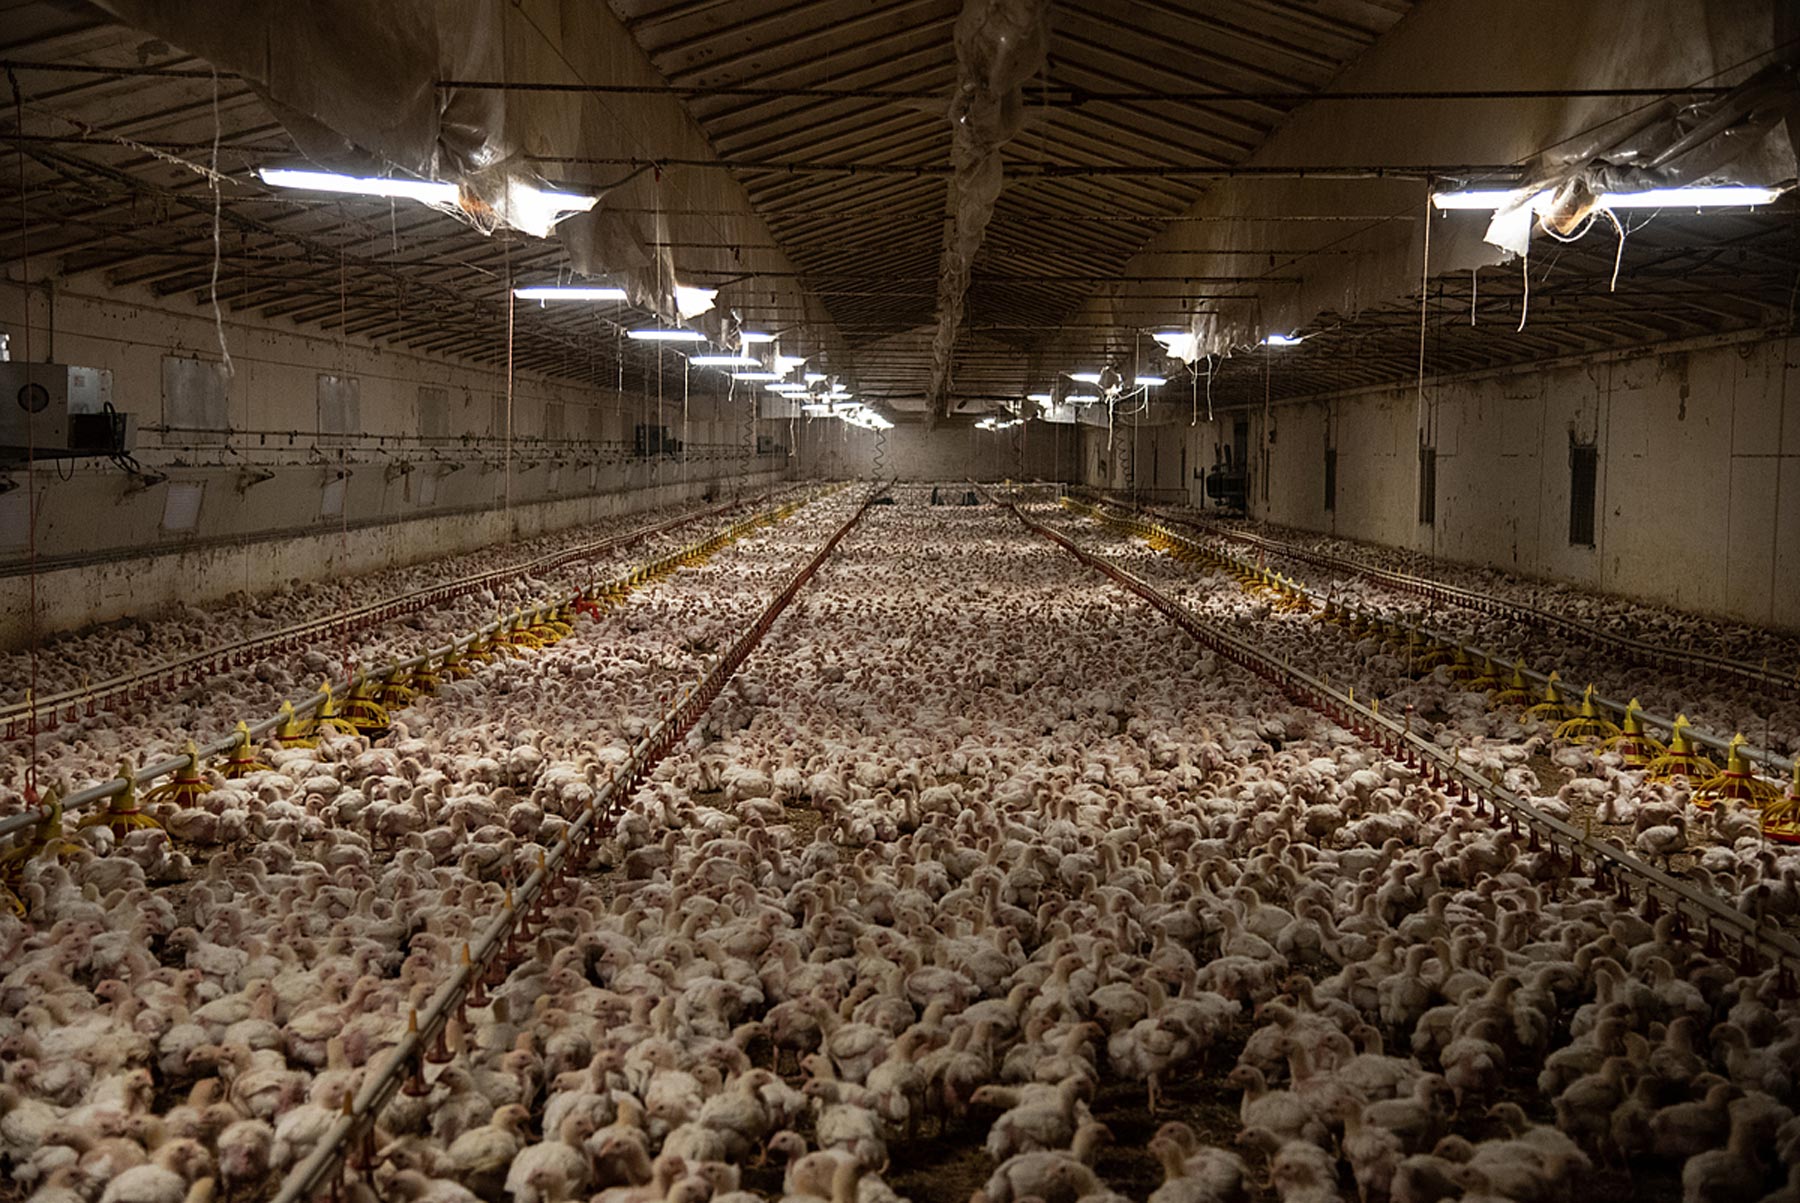 The upper floor of a chicken farm in Italy. This shed contains close to 15,000 chickens on each floor. Each shed has two or three flloors and the farm has a dozen sheds.